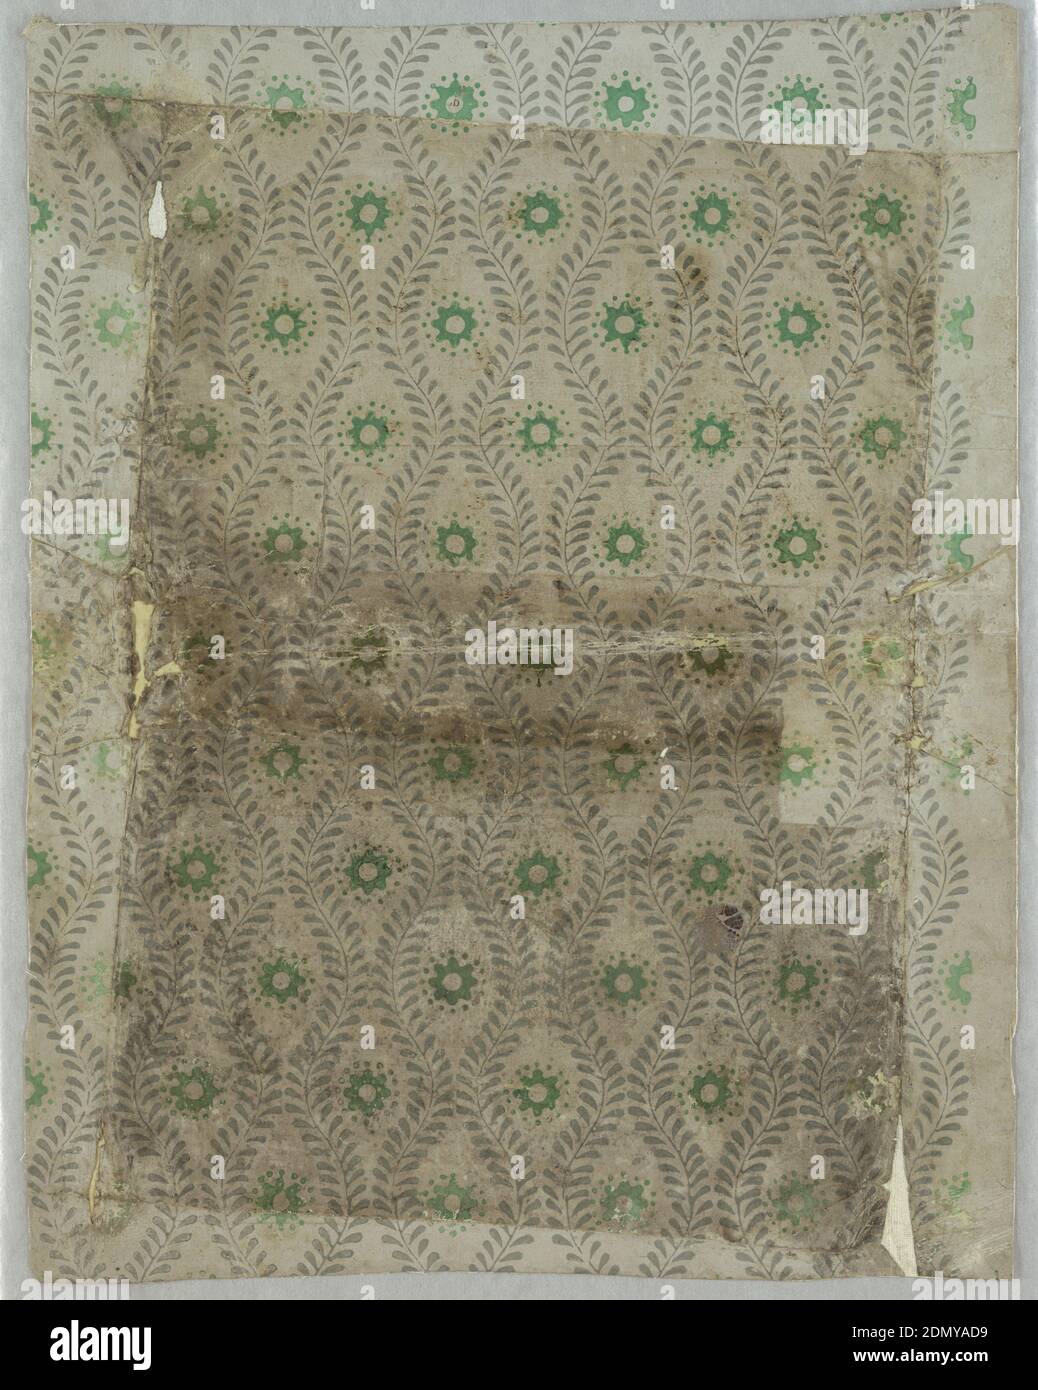 Sidewall - fragment, Block-printed, distemper colors, Alternating vertical serpentine foliate bands enclosing irregular ellipses, each set with a green flower form surrounded by a circle of green dots. Border present along right edge. Original colors appear along edges, where paper has been folded. Paper has small threads in it. Formerly used as a book cover., England, ca. 1800, Wallcoverings, Sidewall - fragment Stock Photo